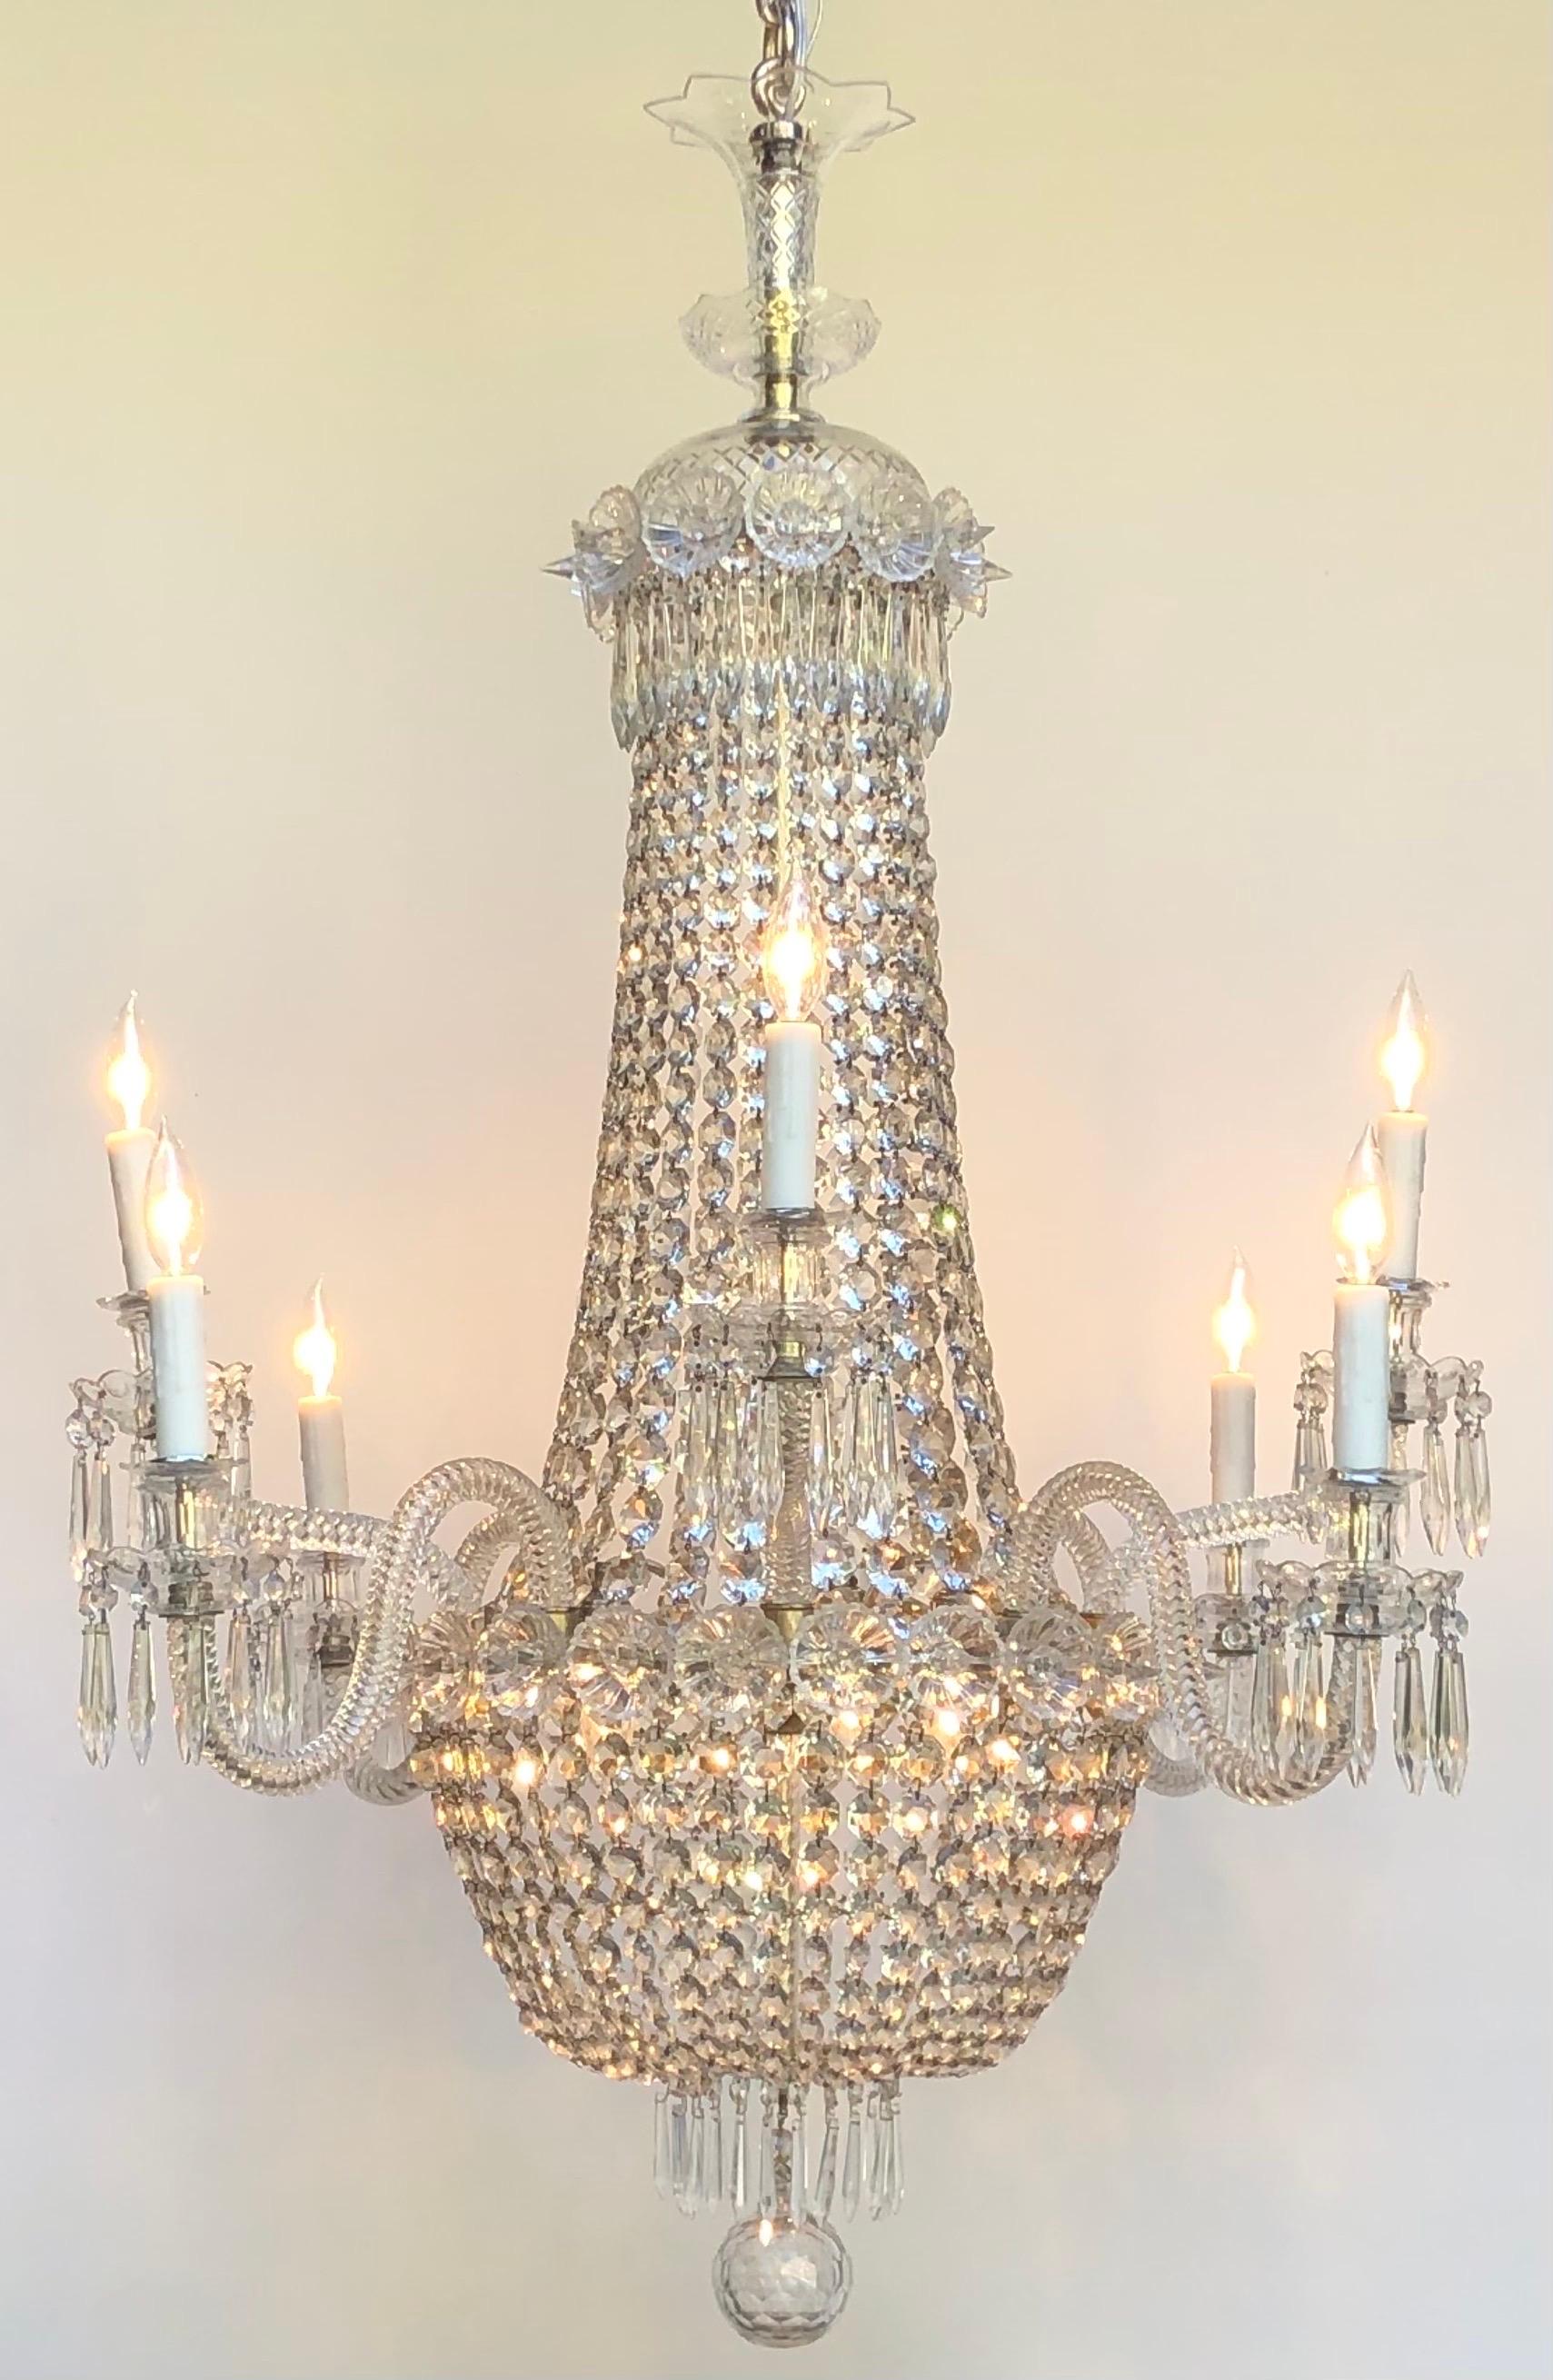 Regency Tent-and-Basket Silver Plate & Crystal Chandelier / Gasolier Eight Light For Sale 1